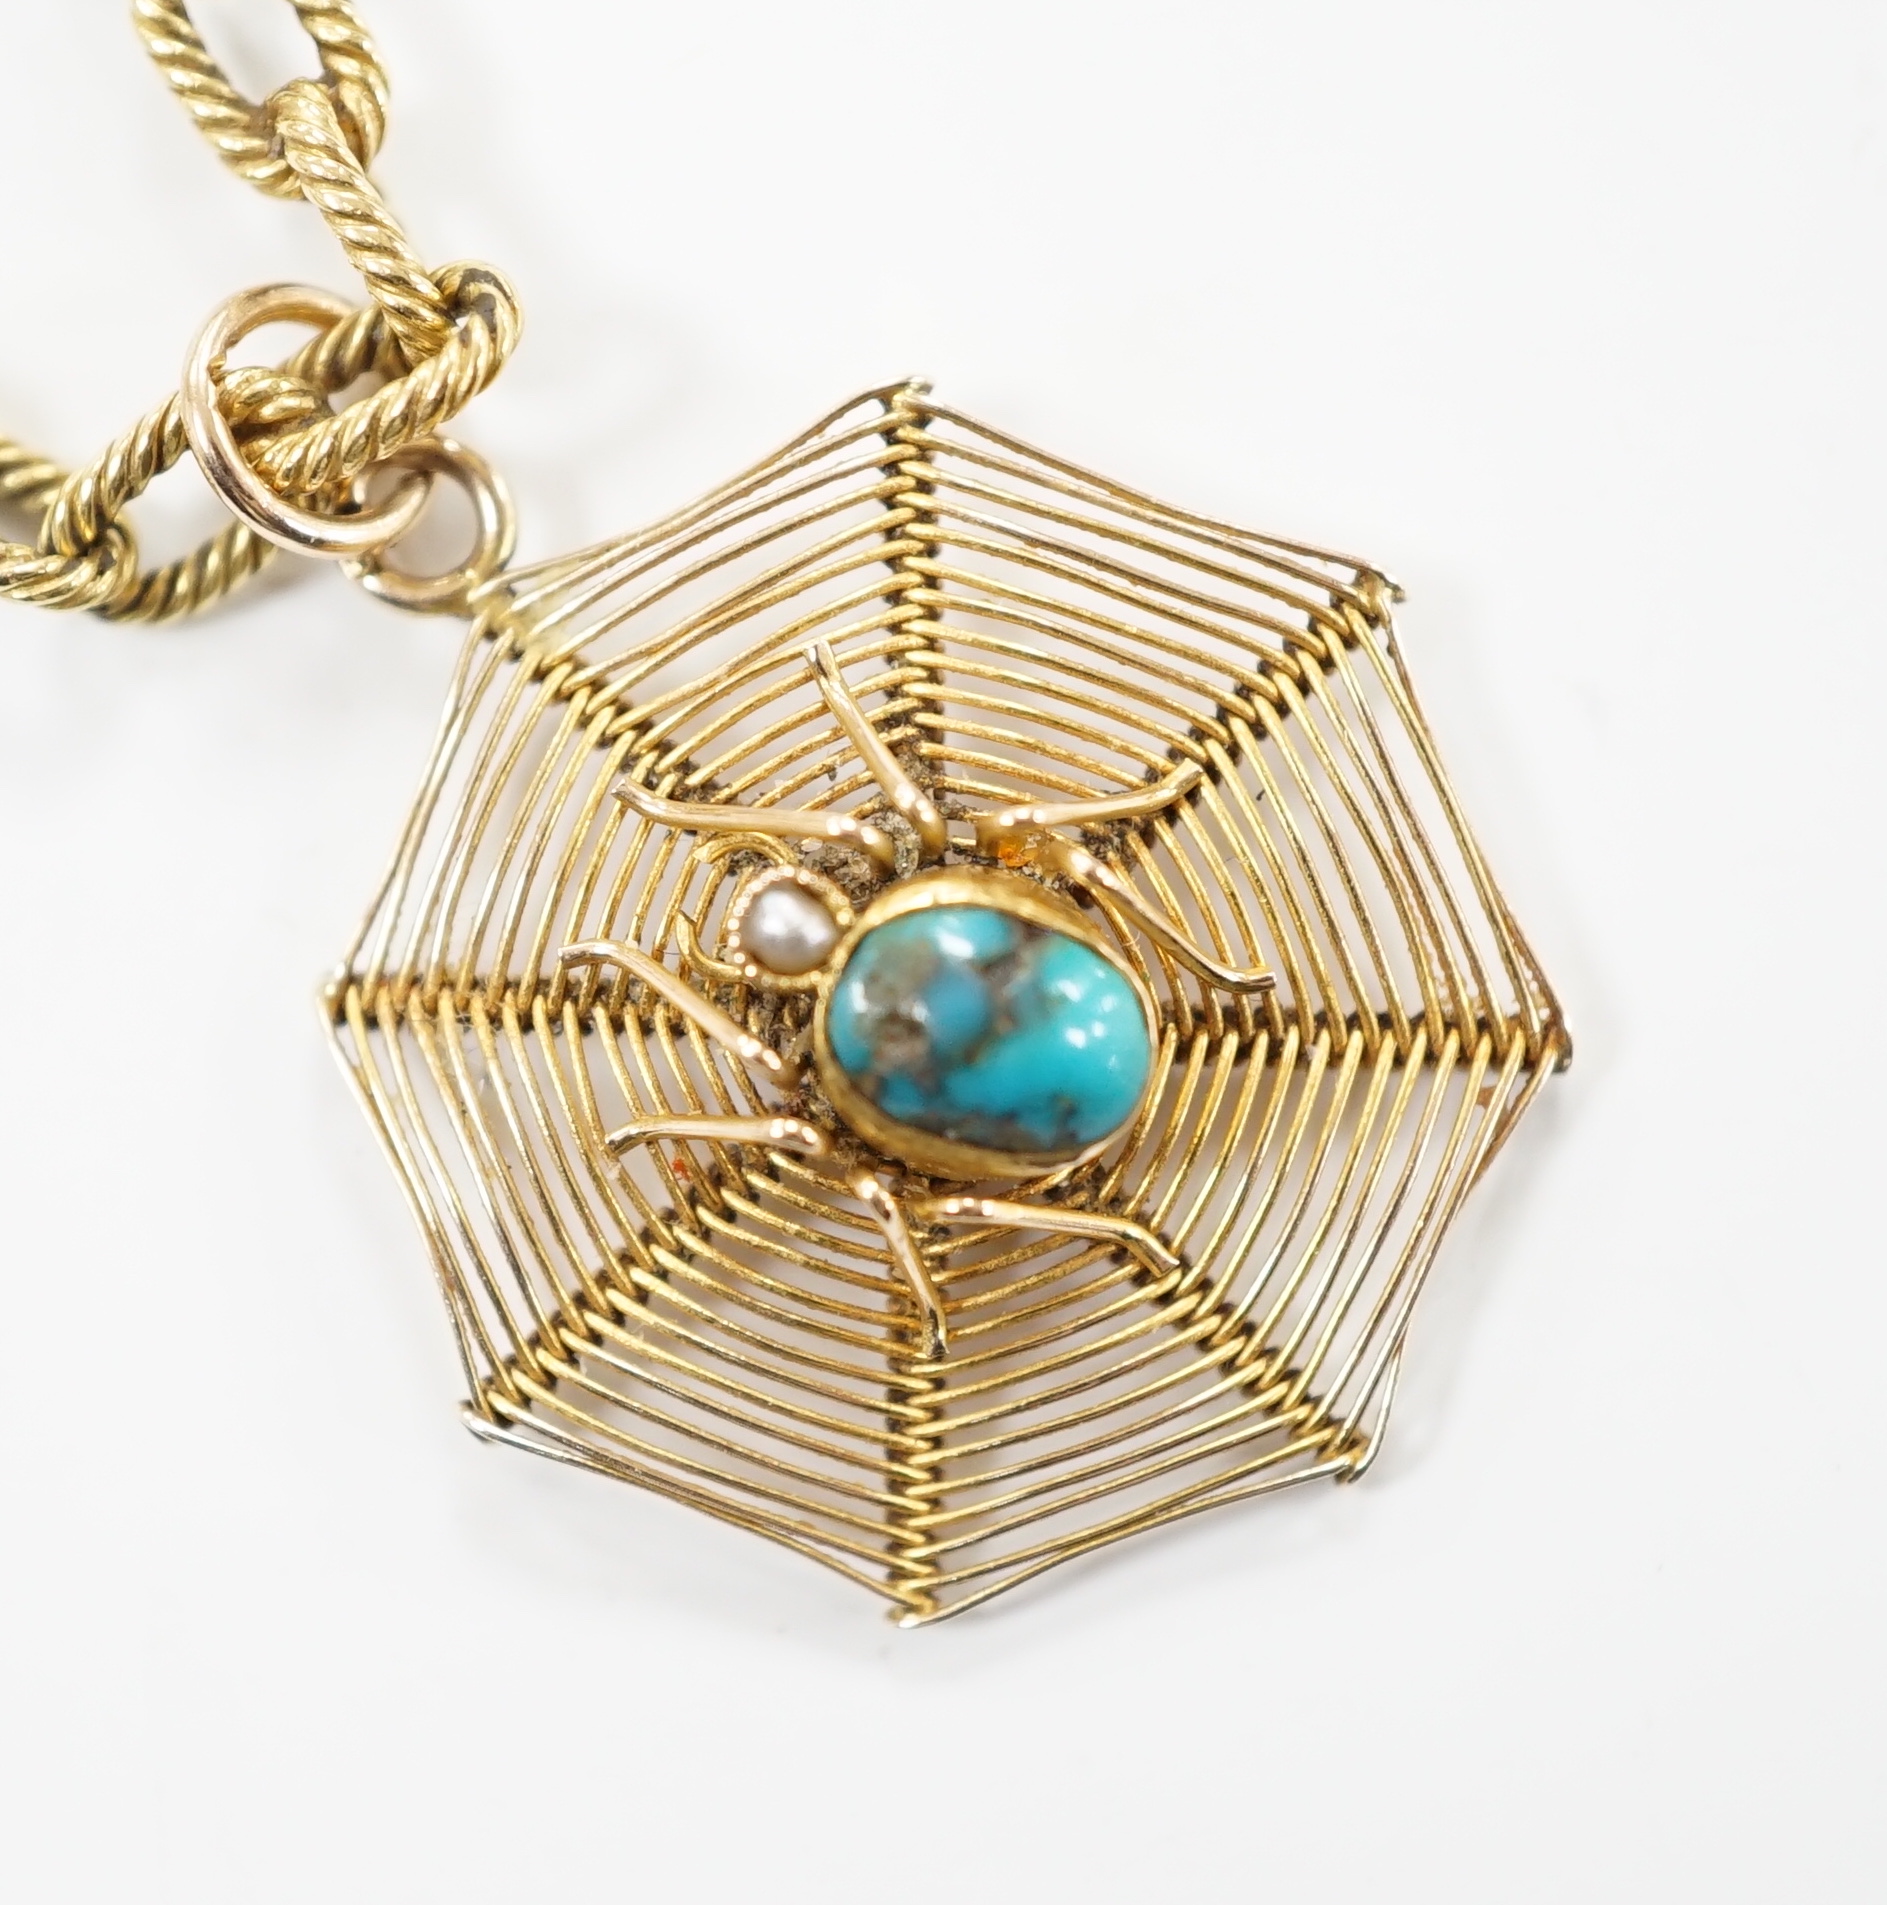 An early 20th century 9ct, turquoise and seed pearl set 'spider and web' pendant, 30mm, on a yellow metal chain, stamped 18 and numbered 2312, one link bearing the engraved word 'Cartier', 58cm, gross weight 23.2 grams.